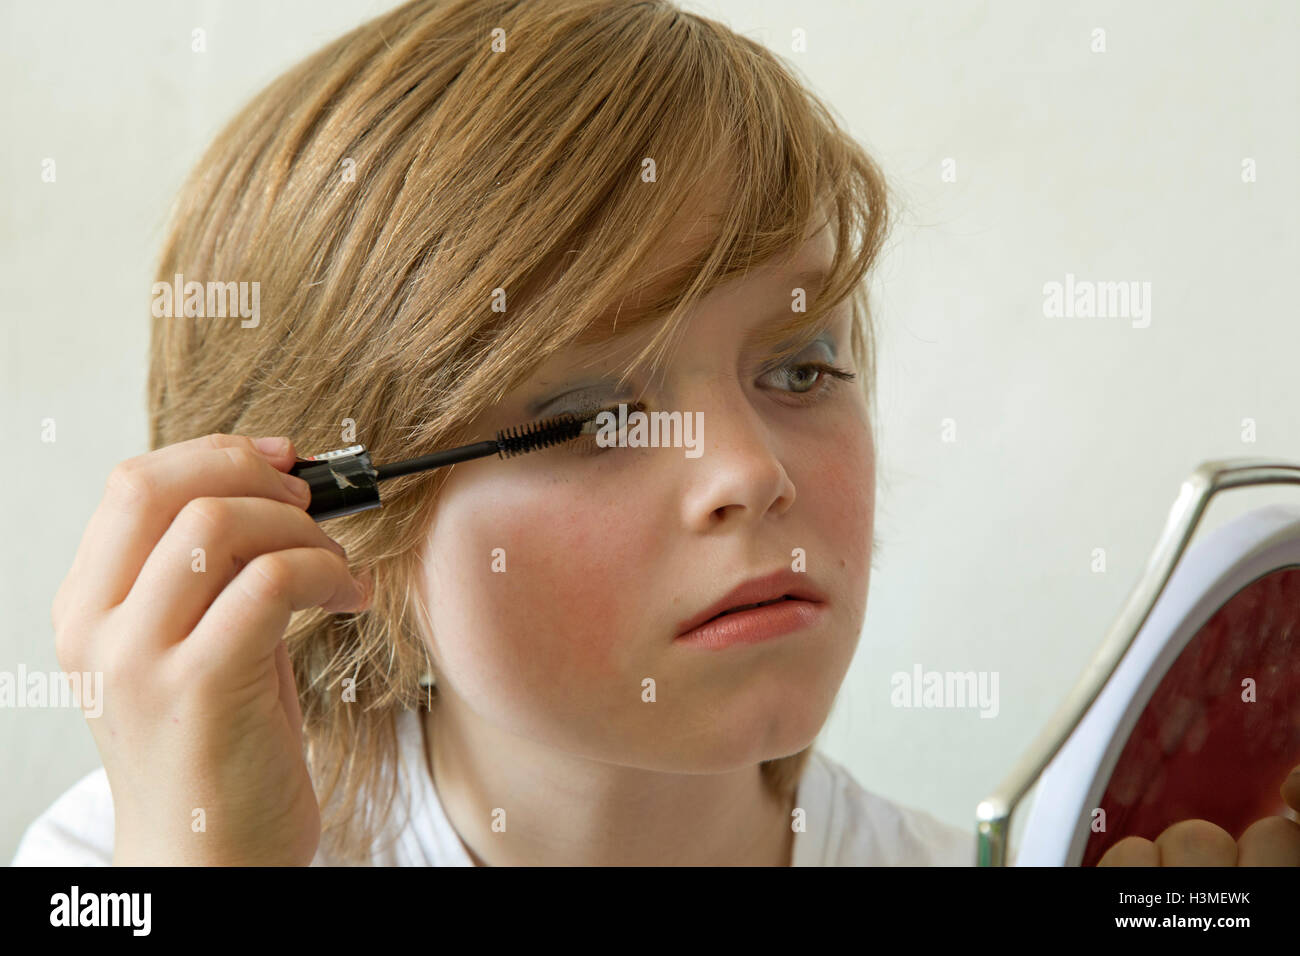 young boy putting makeup on pretending to be a girl Stock Photo